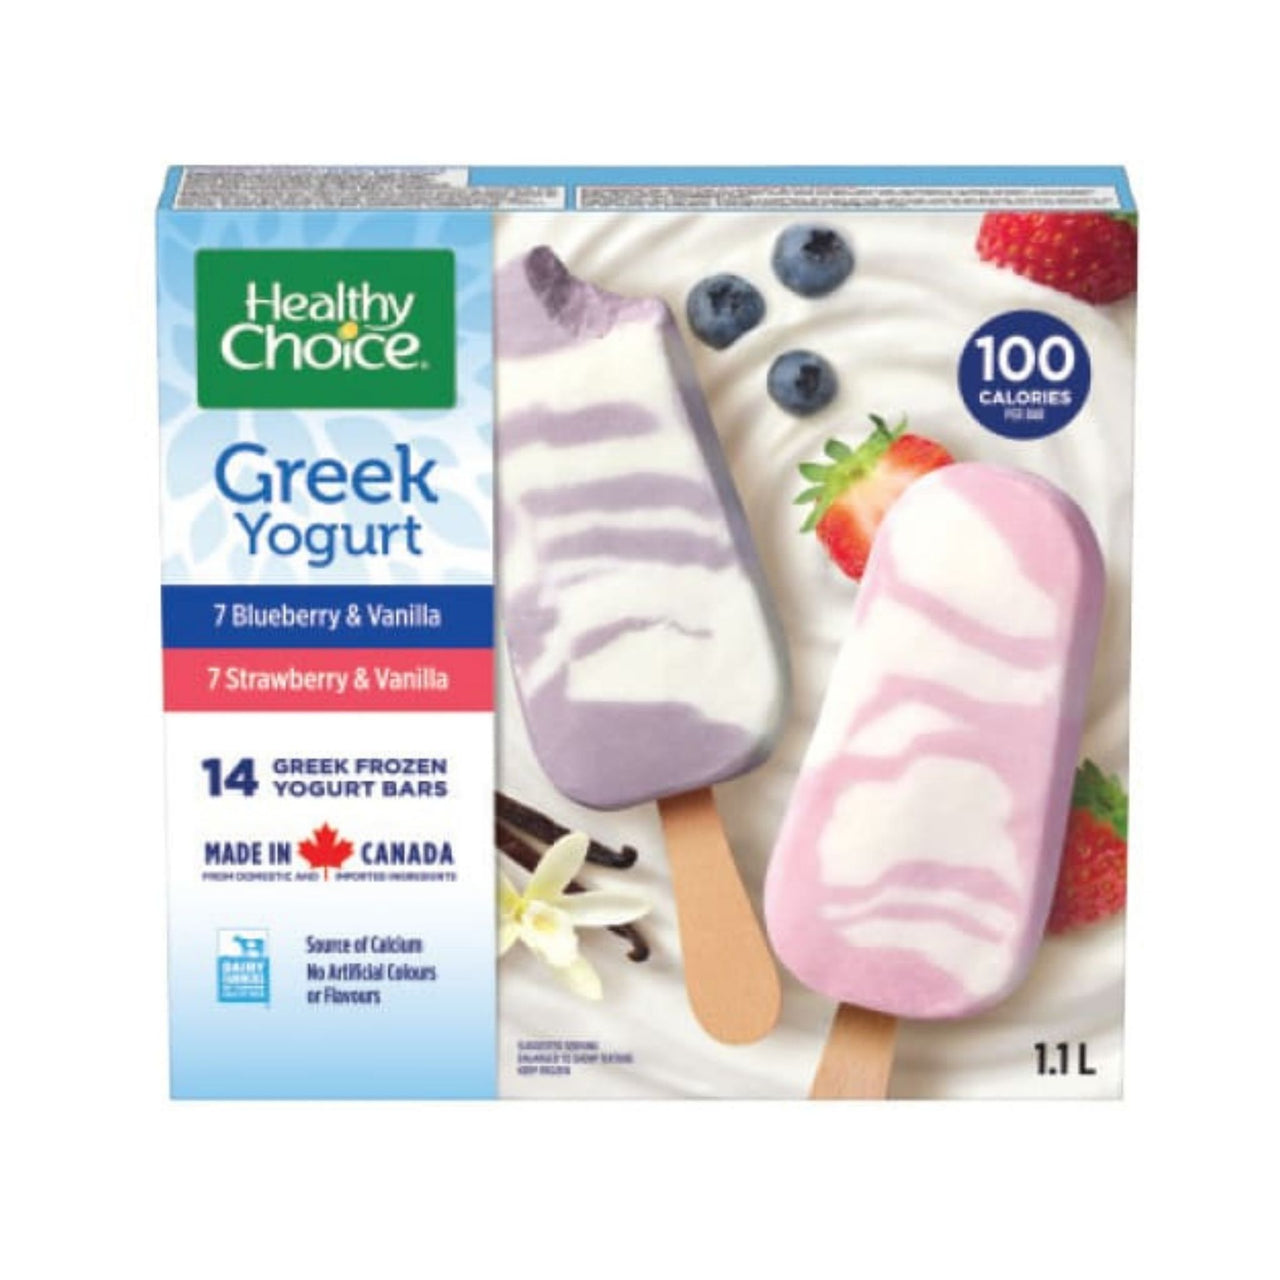 Image of Healthy Choice Frozen Yogurt Bars, 14pk, 1.1L - (ship at your own risk)